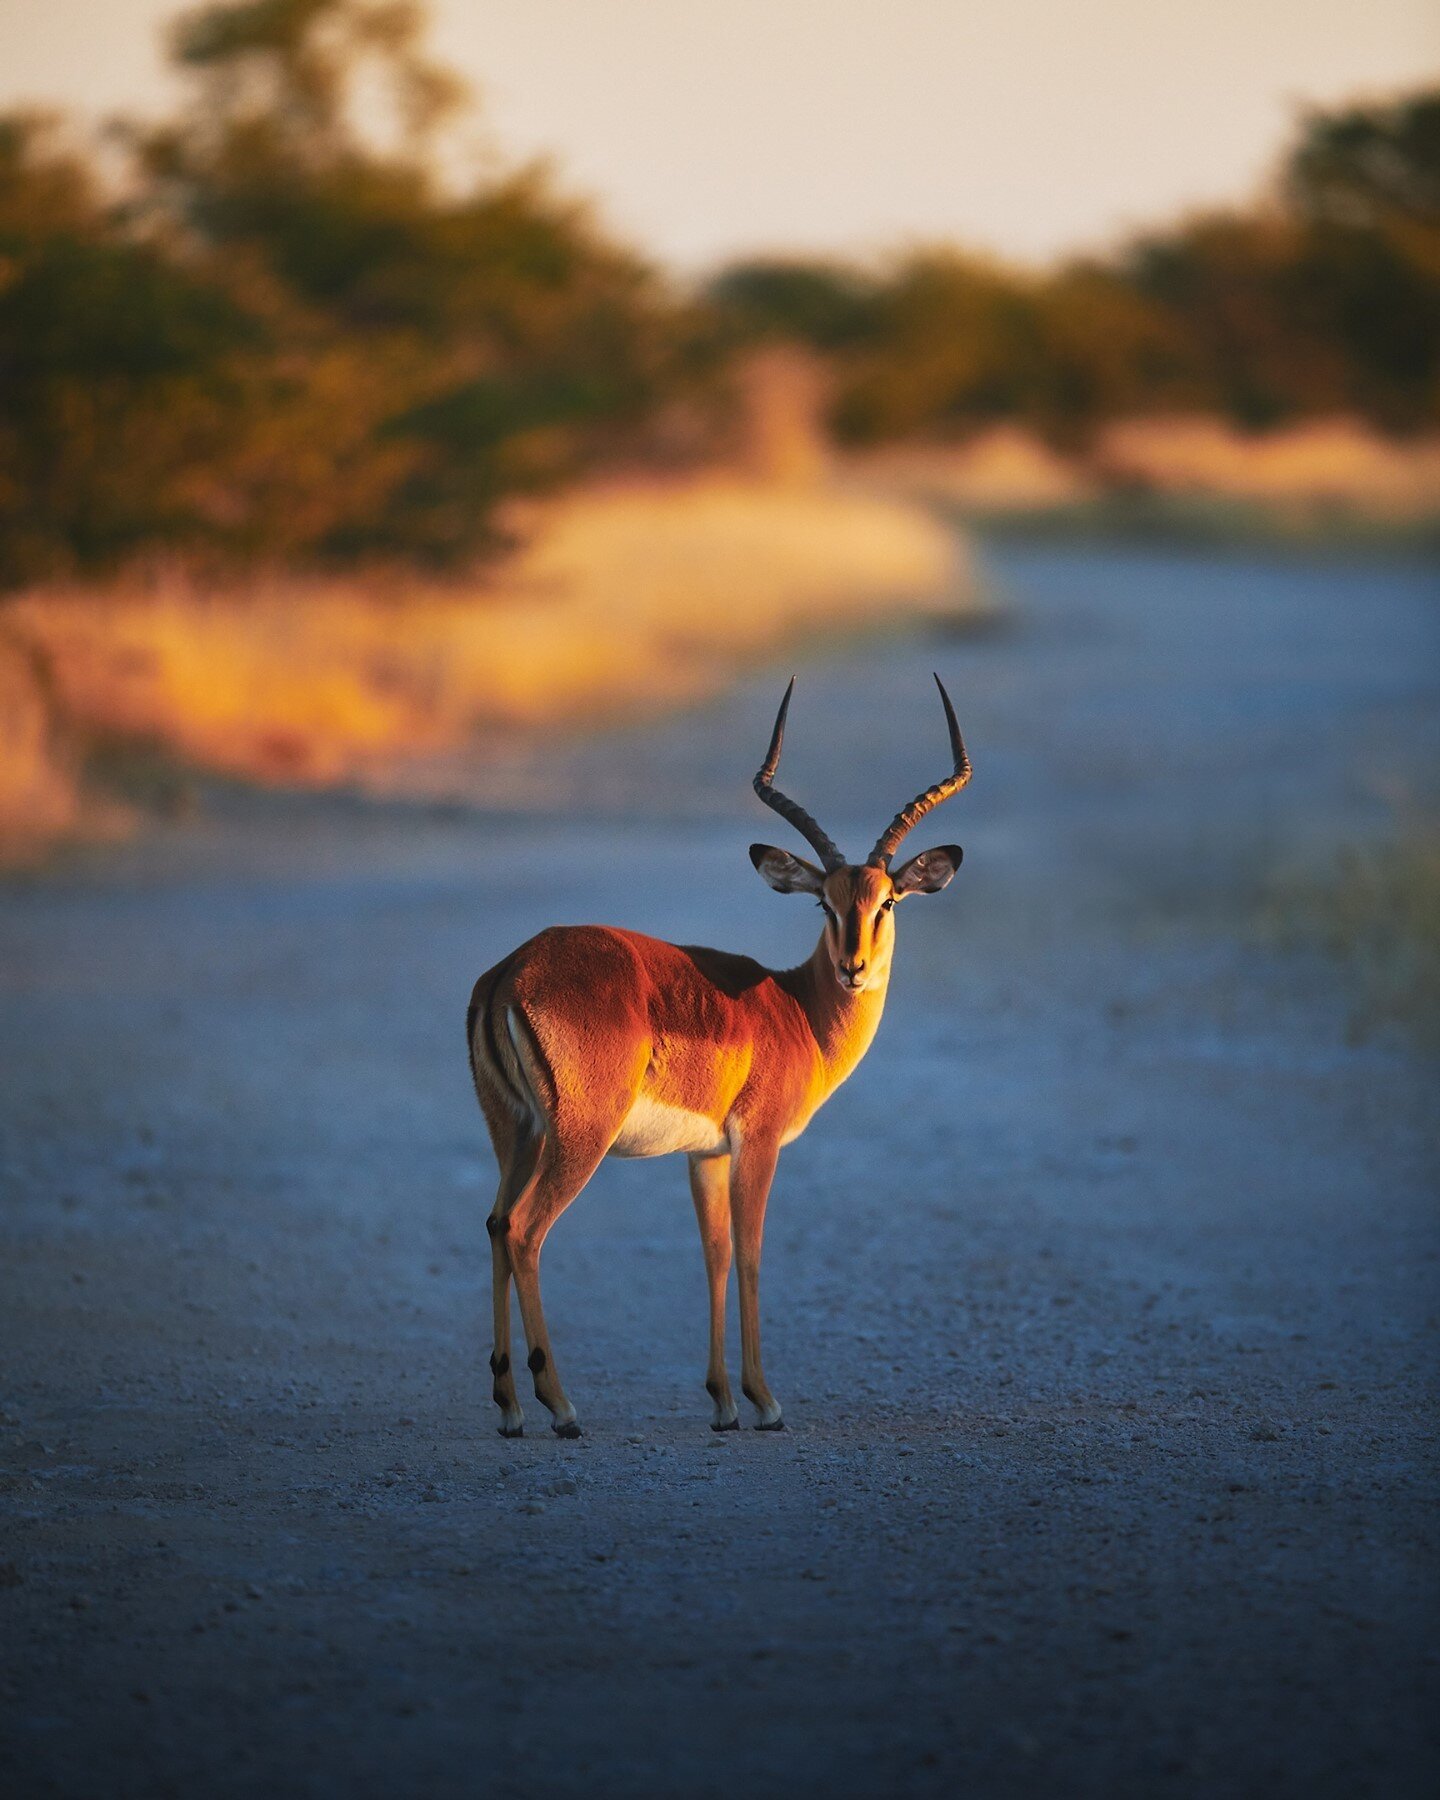 Found this lonely impala just as the first rays of sun came out. Sometimes you get lucky, sometimes not, but if you are not there you'll never know. 🇳🇦⁠